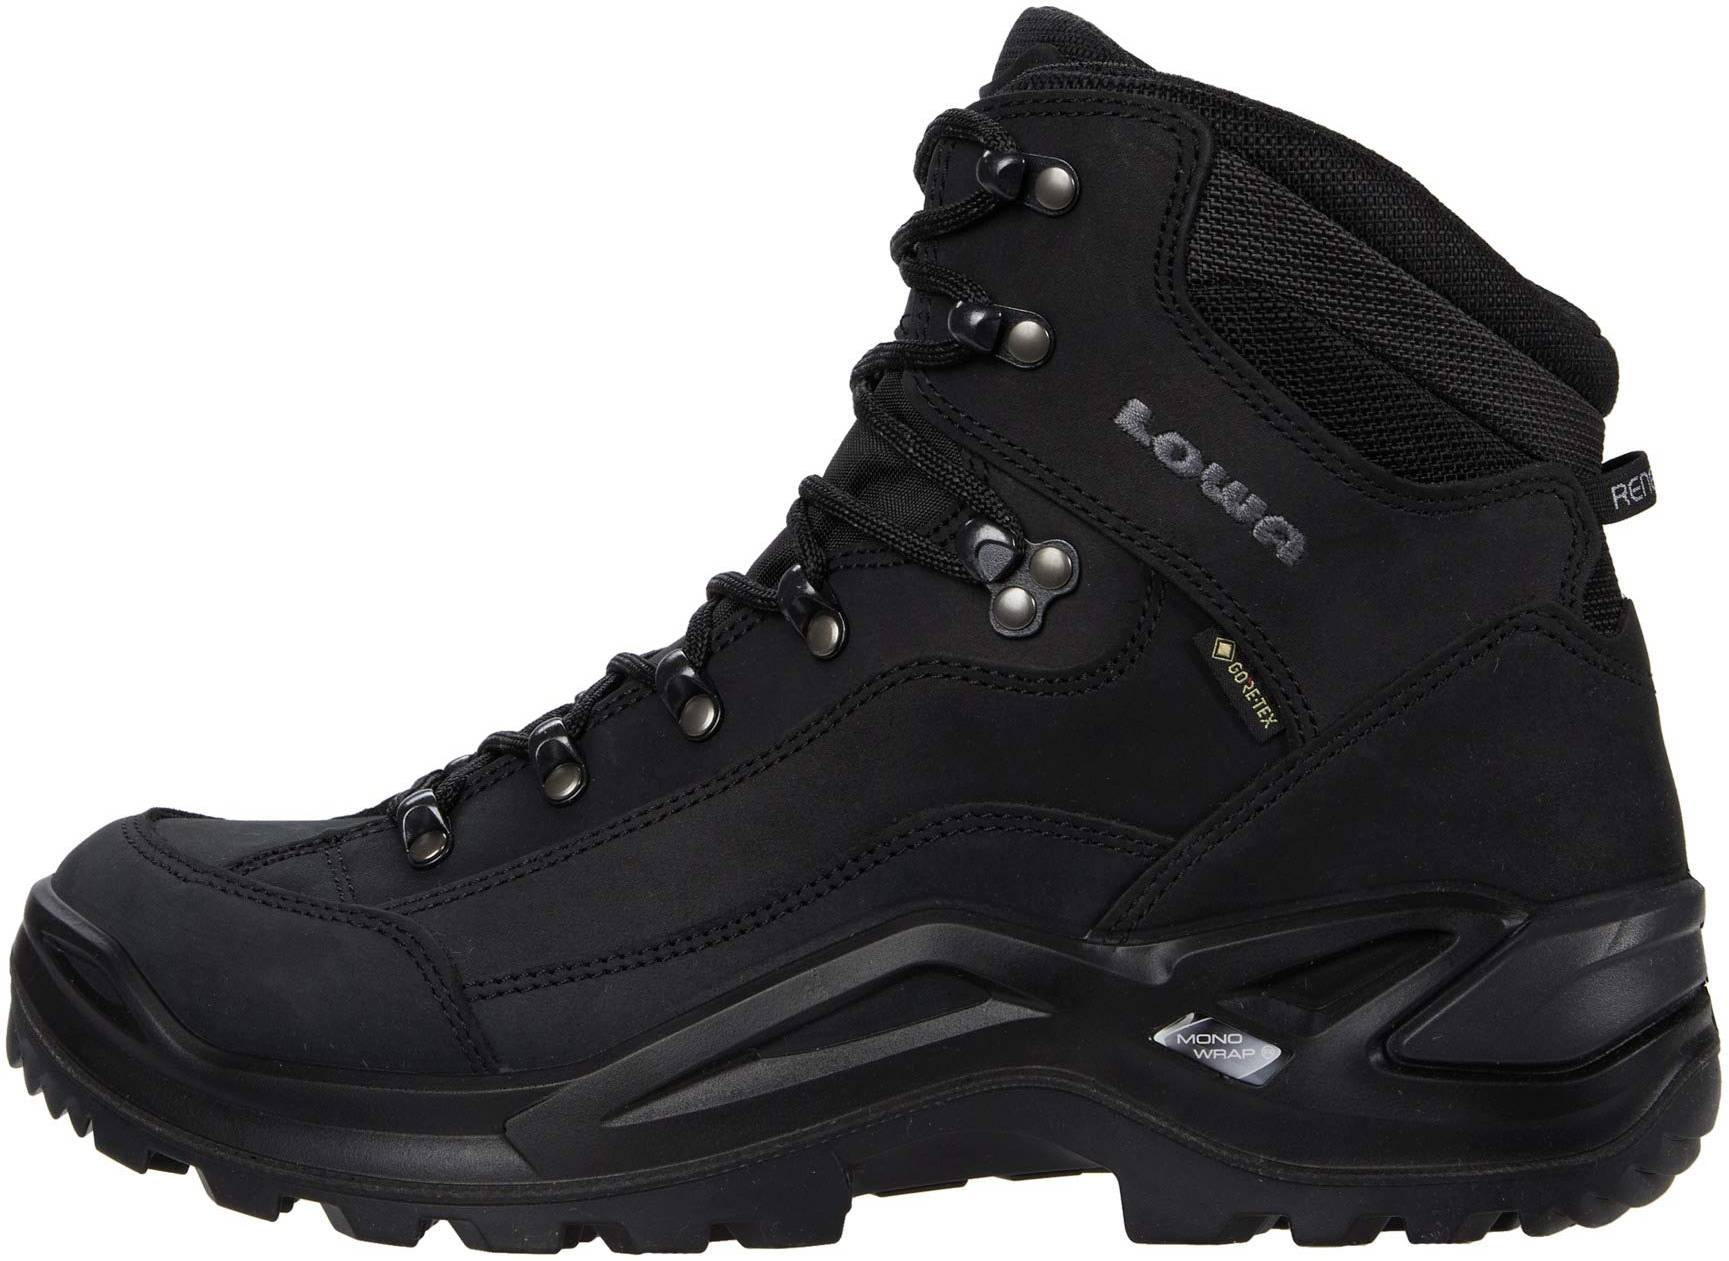 zout analyse telescoop Lowa Renegade GTX Mid Review, Facts, Comparison | RunRepeat